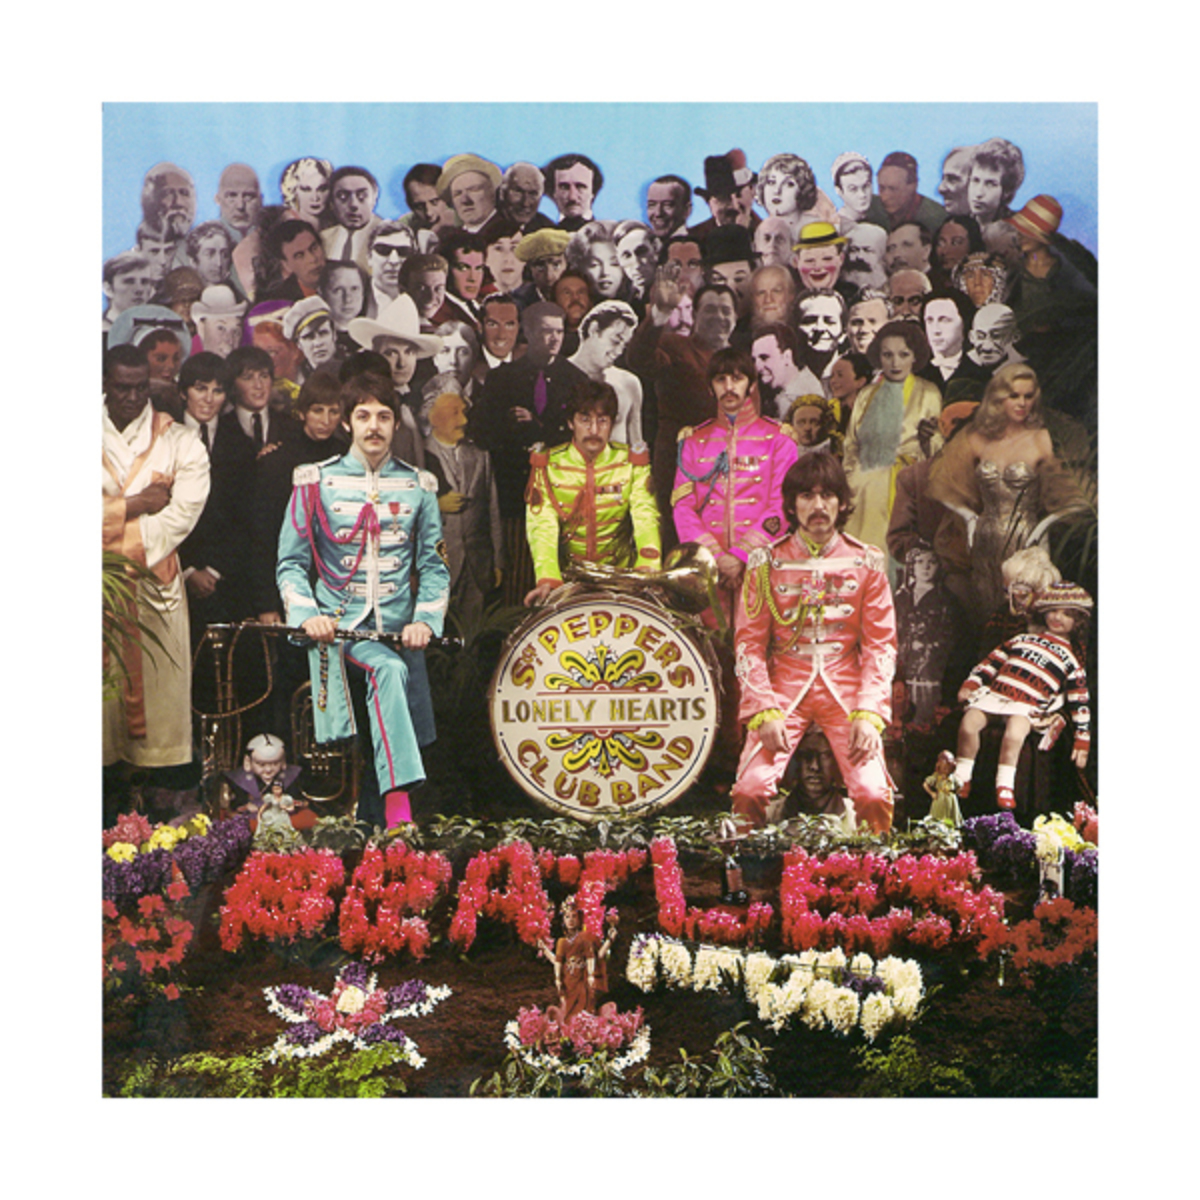 The Beatles – Sgt. Pepper’s Lonely Hearts Club Band Outtakes by Michael Cooper